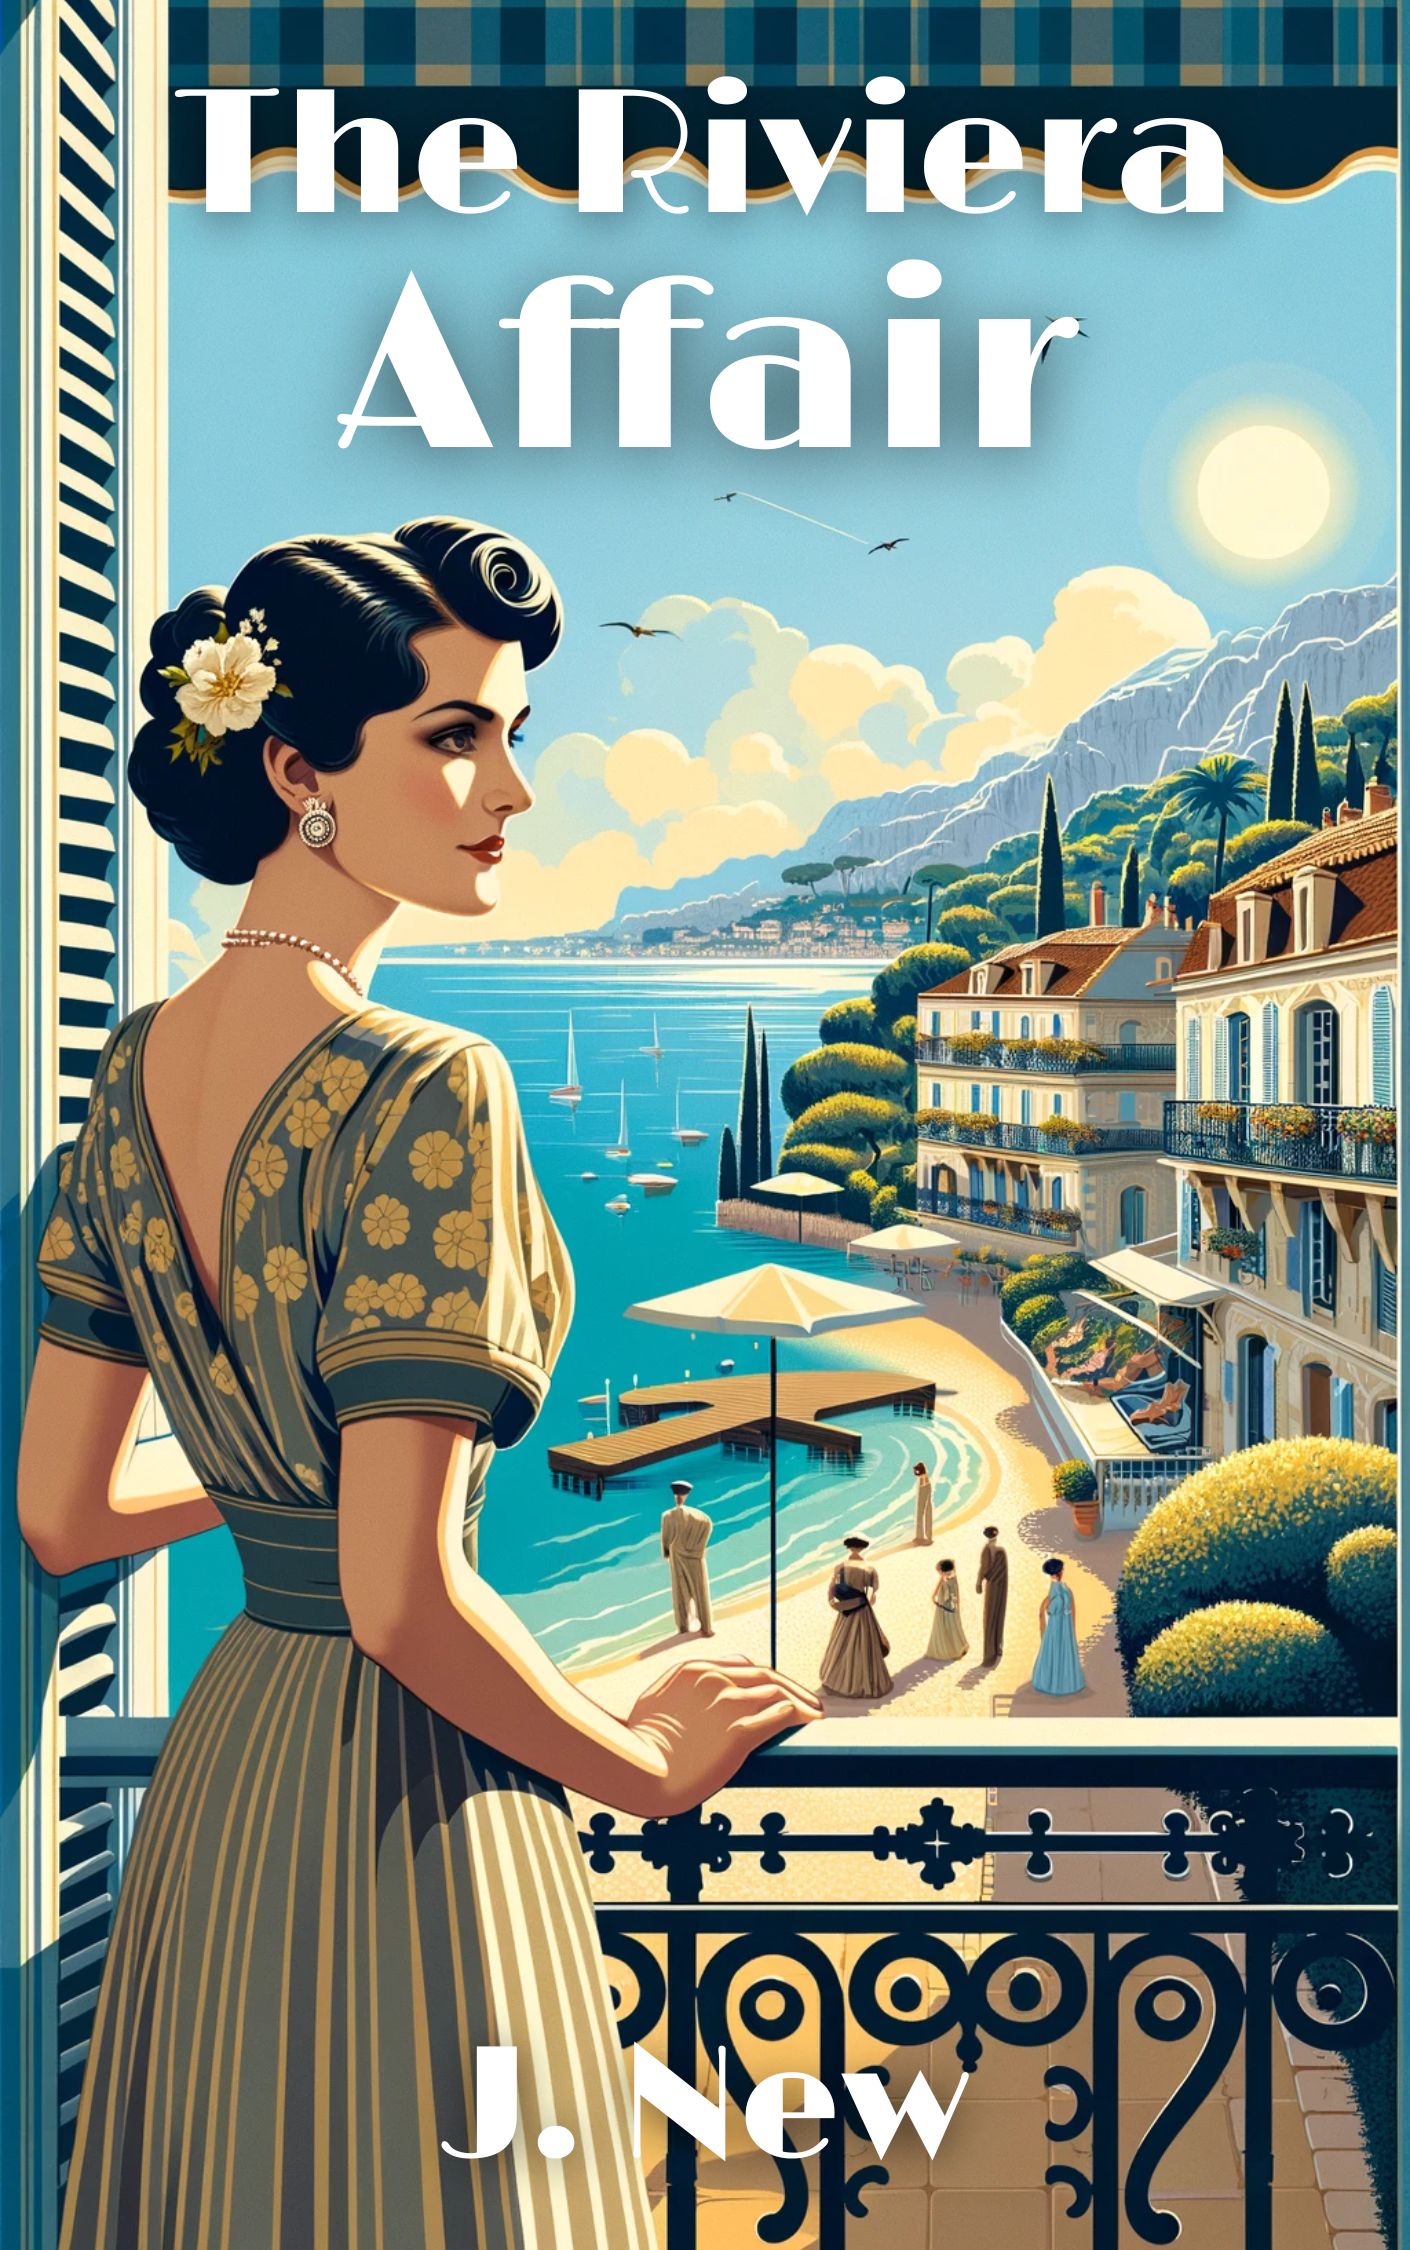 The Riviera Affair, book 4 in the hugely popular British 1930s Historical mystery series by author J. New. Dubbed Miss Marple meets The Ghost Whisperer by readers and fans